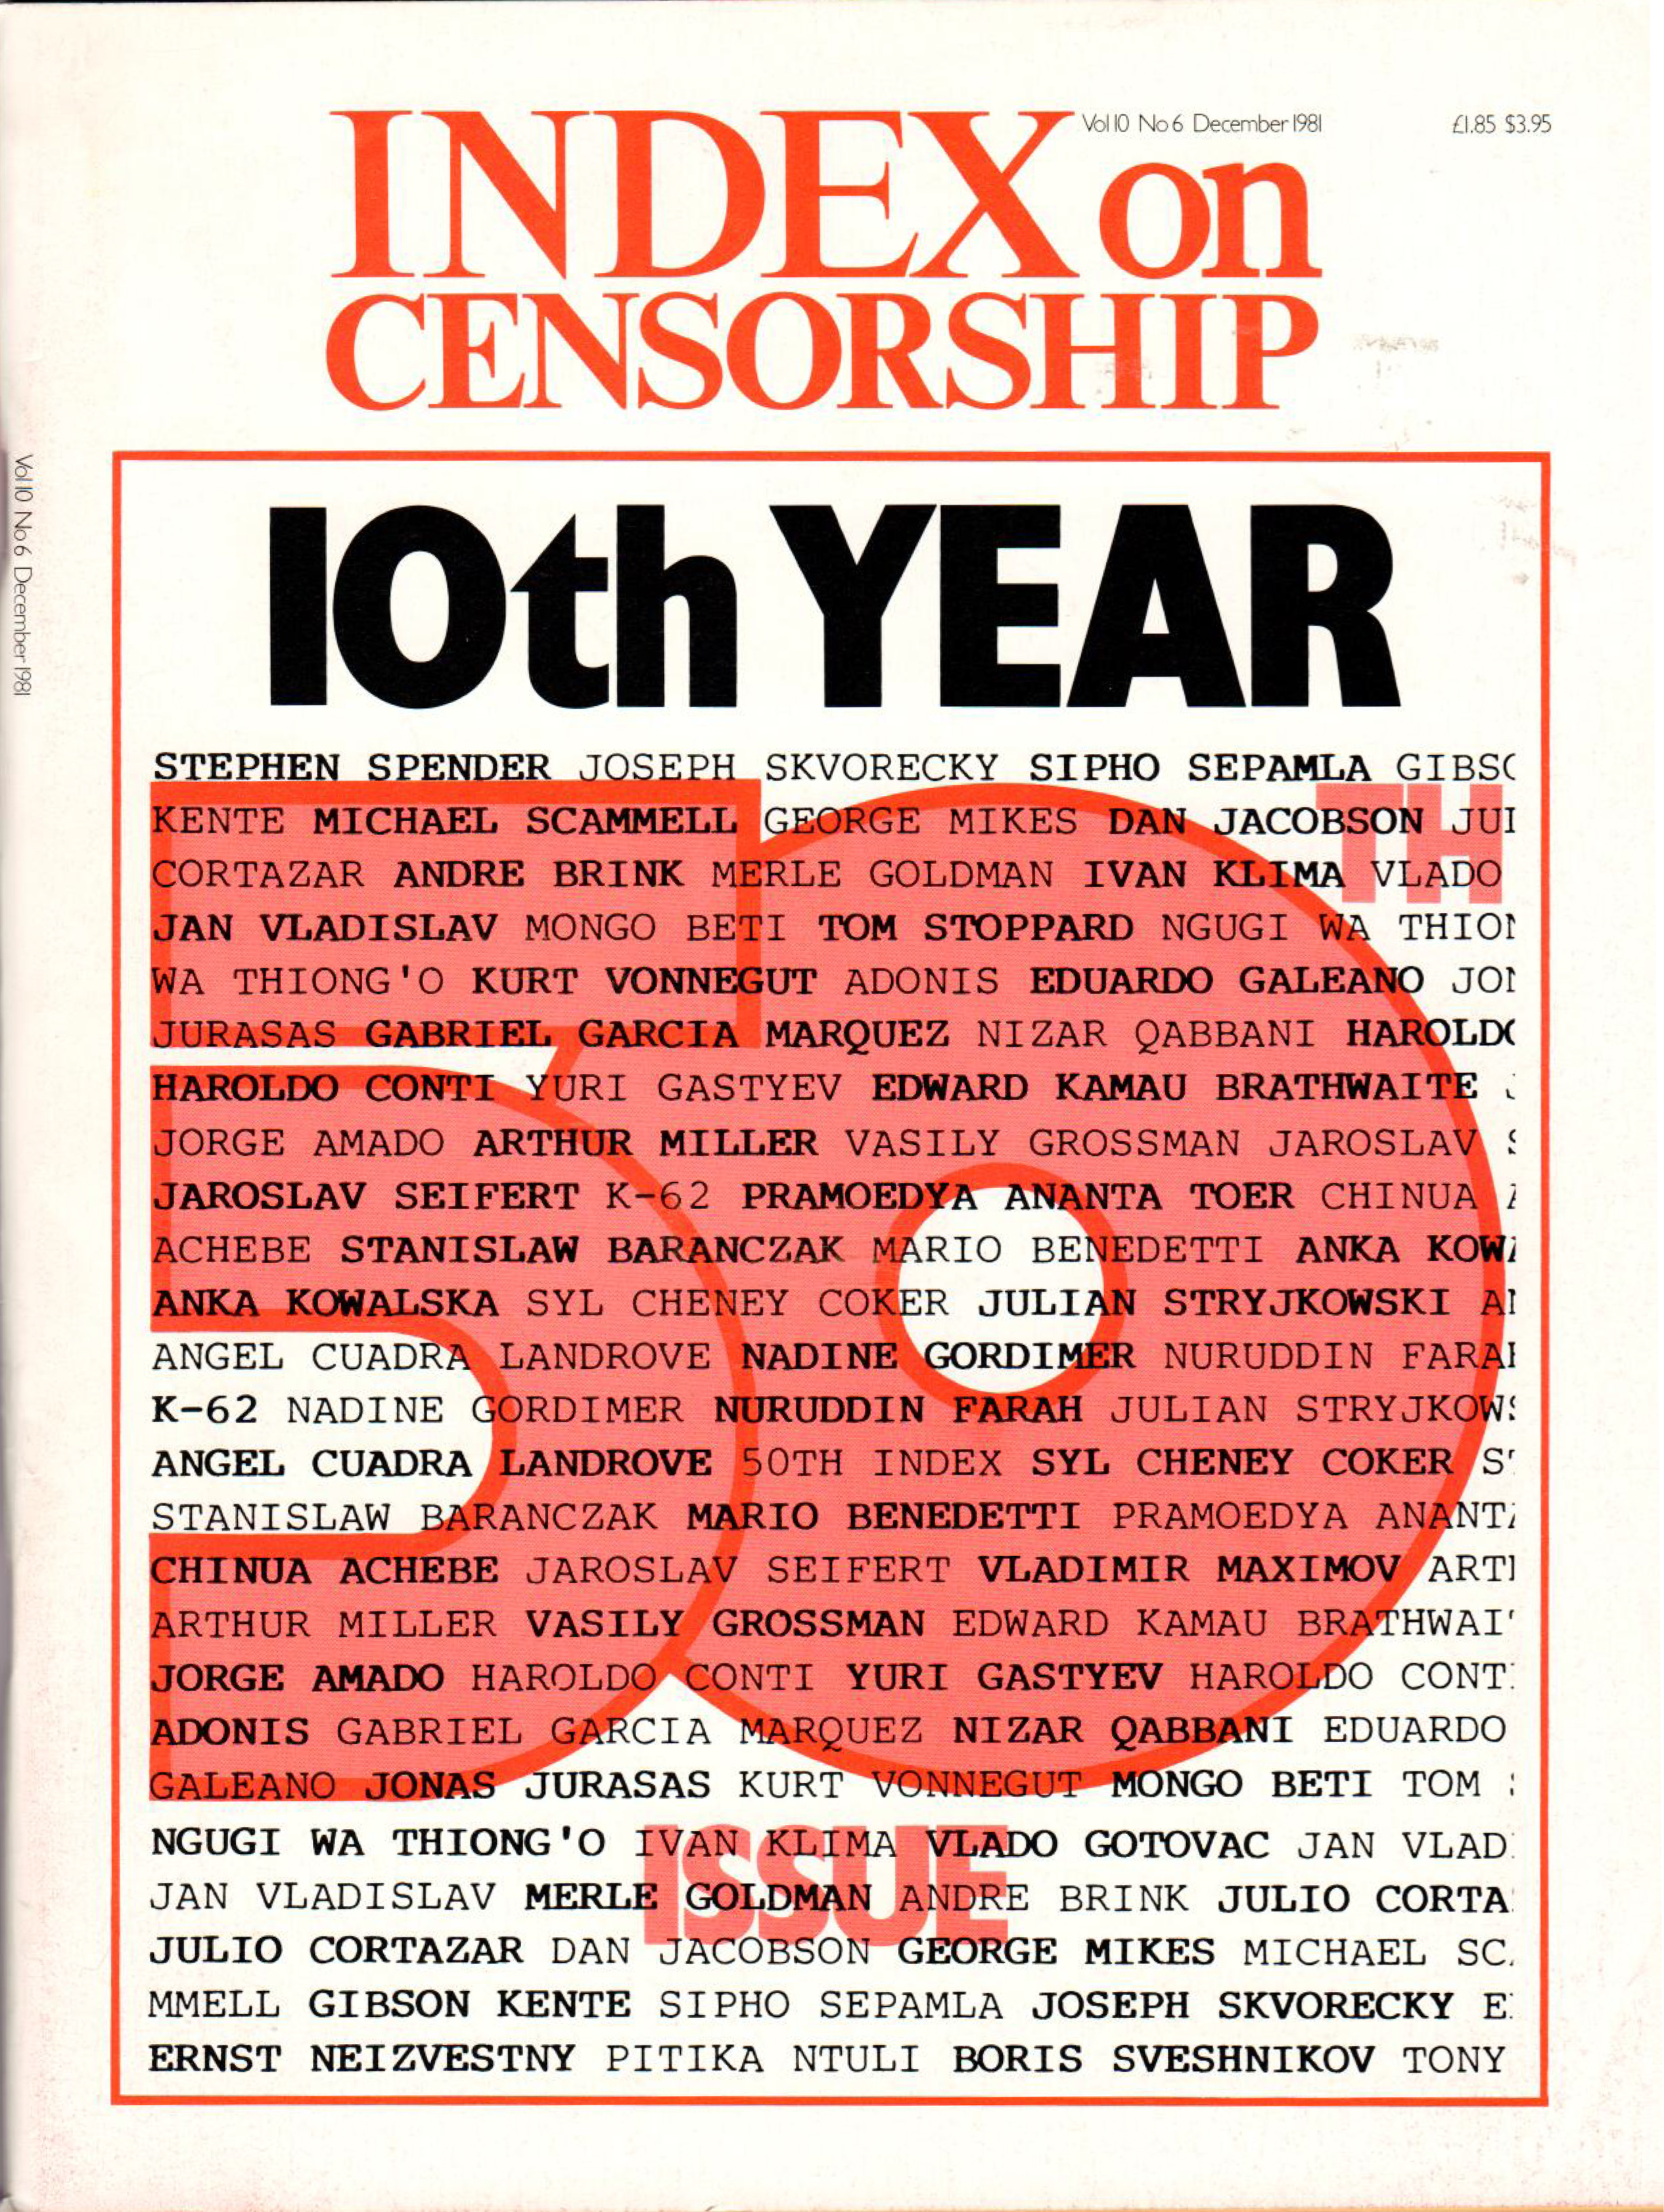 10th year, the December 1981 issue of Index on Censorship magazine